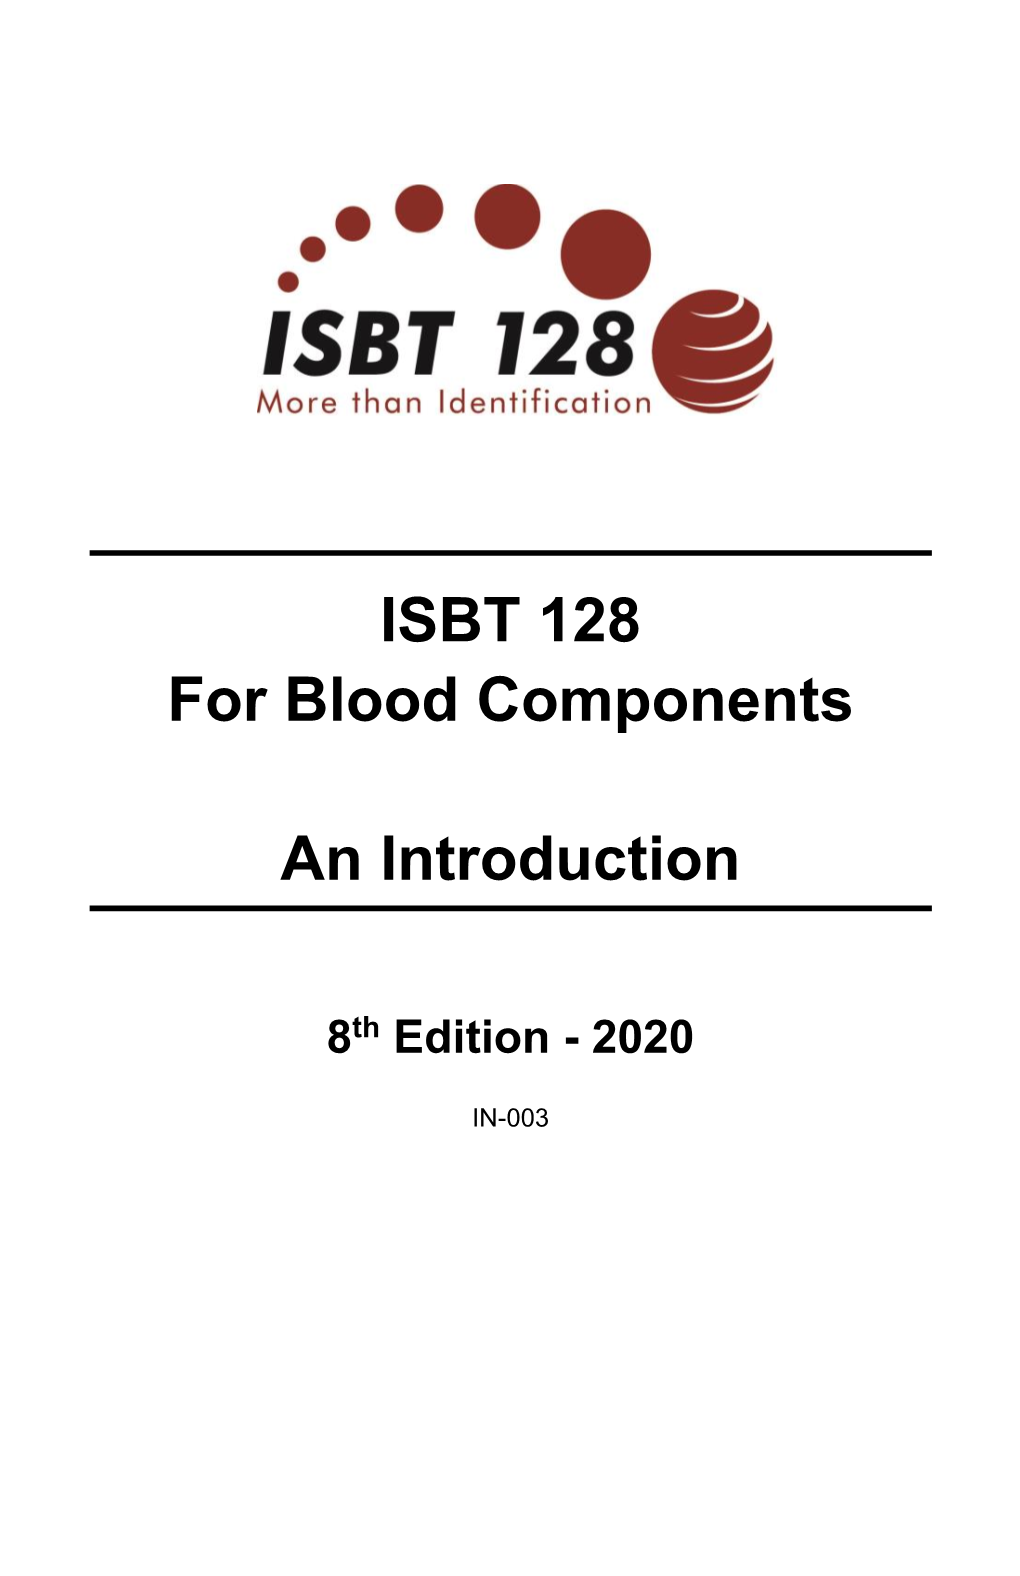 ISBT 128 for Blood Components, an Introduction (Booklet)